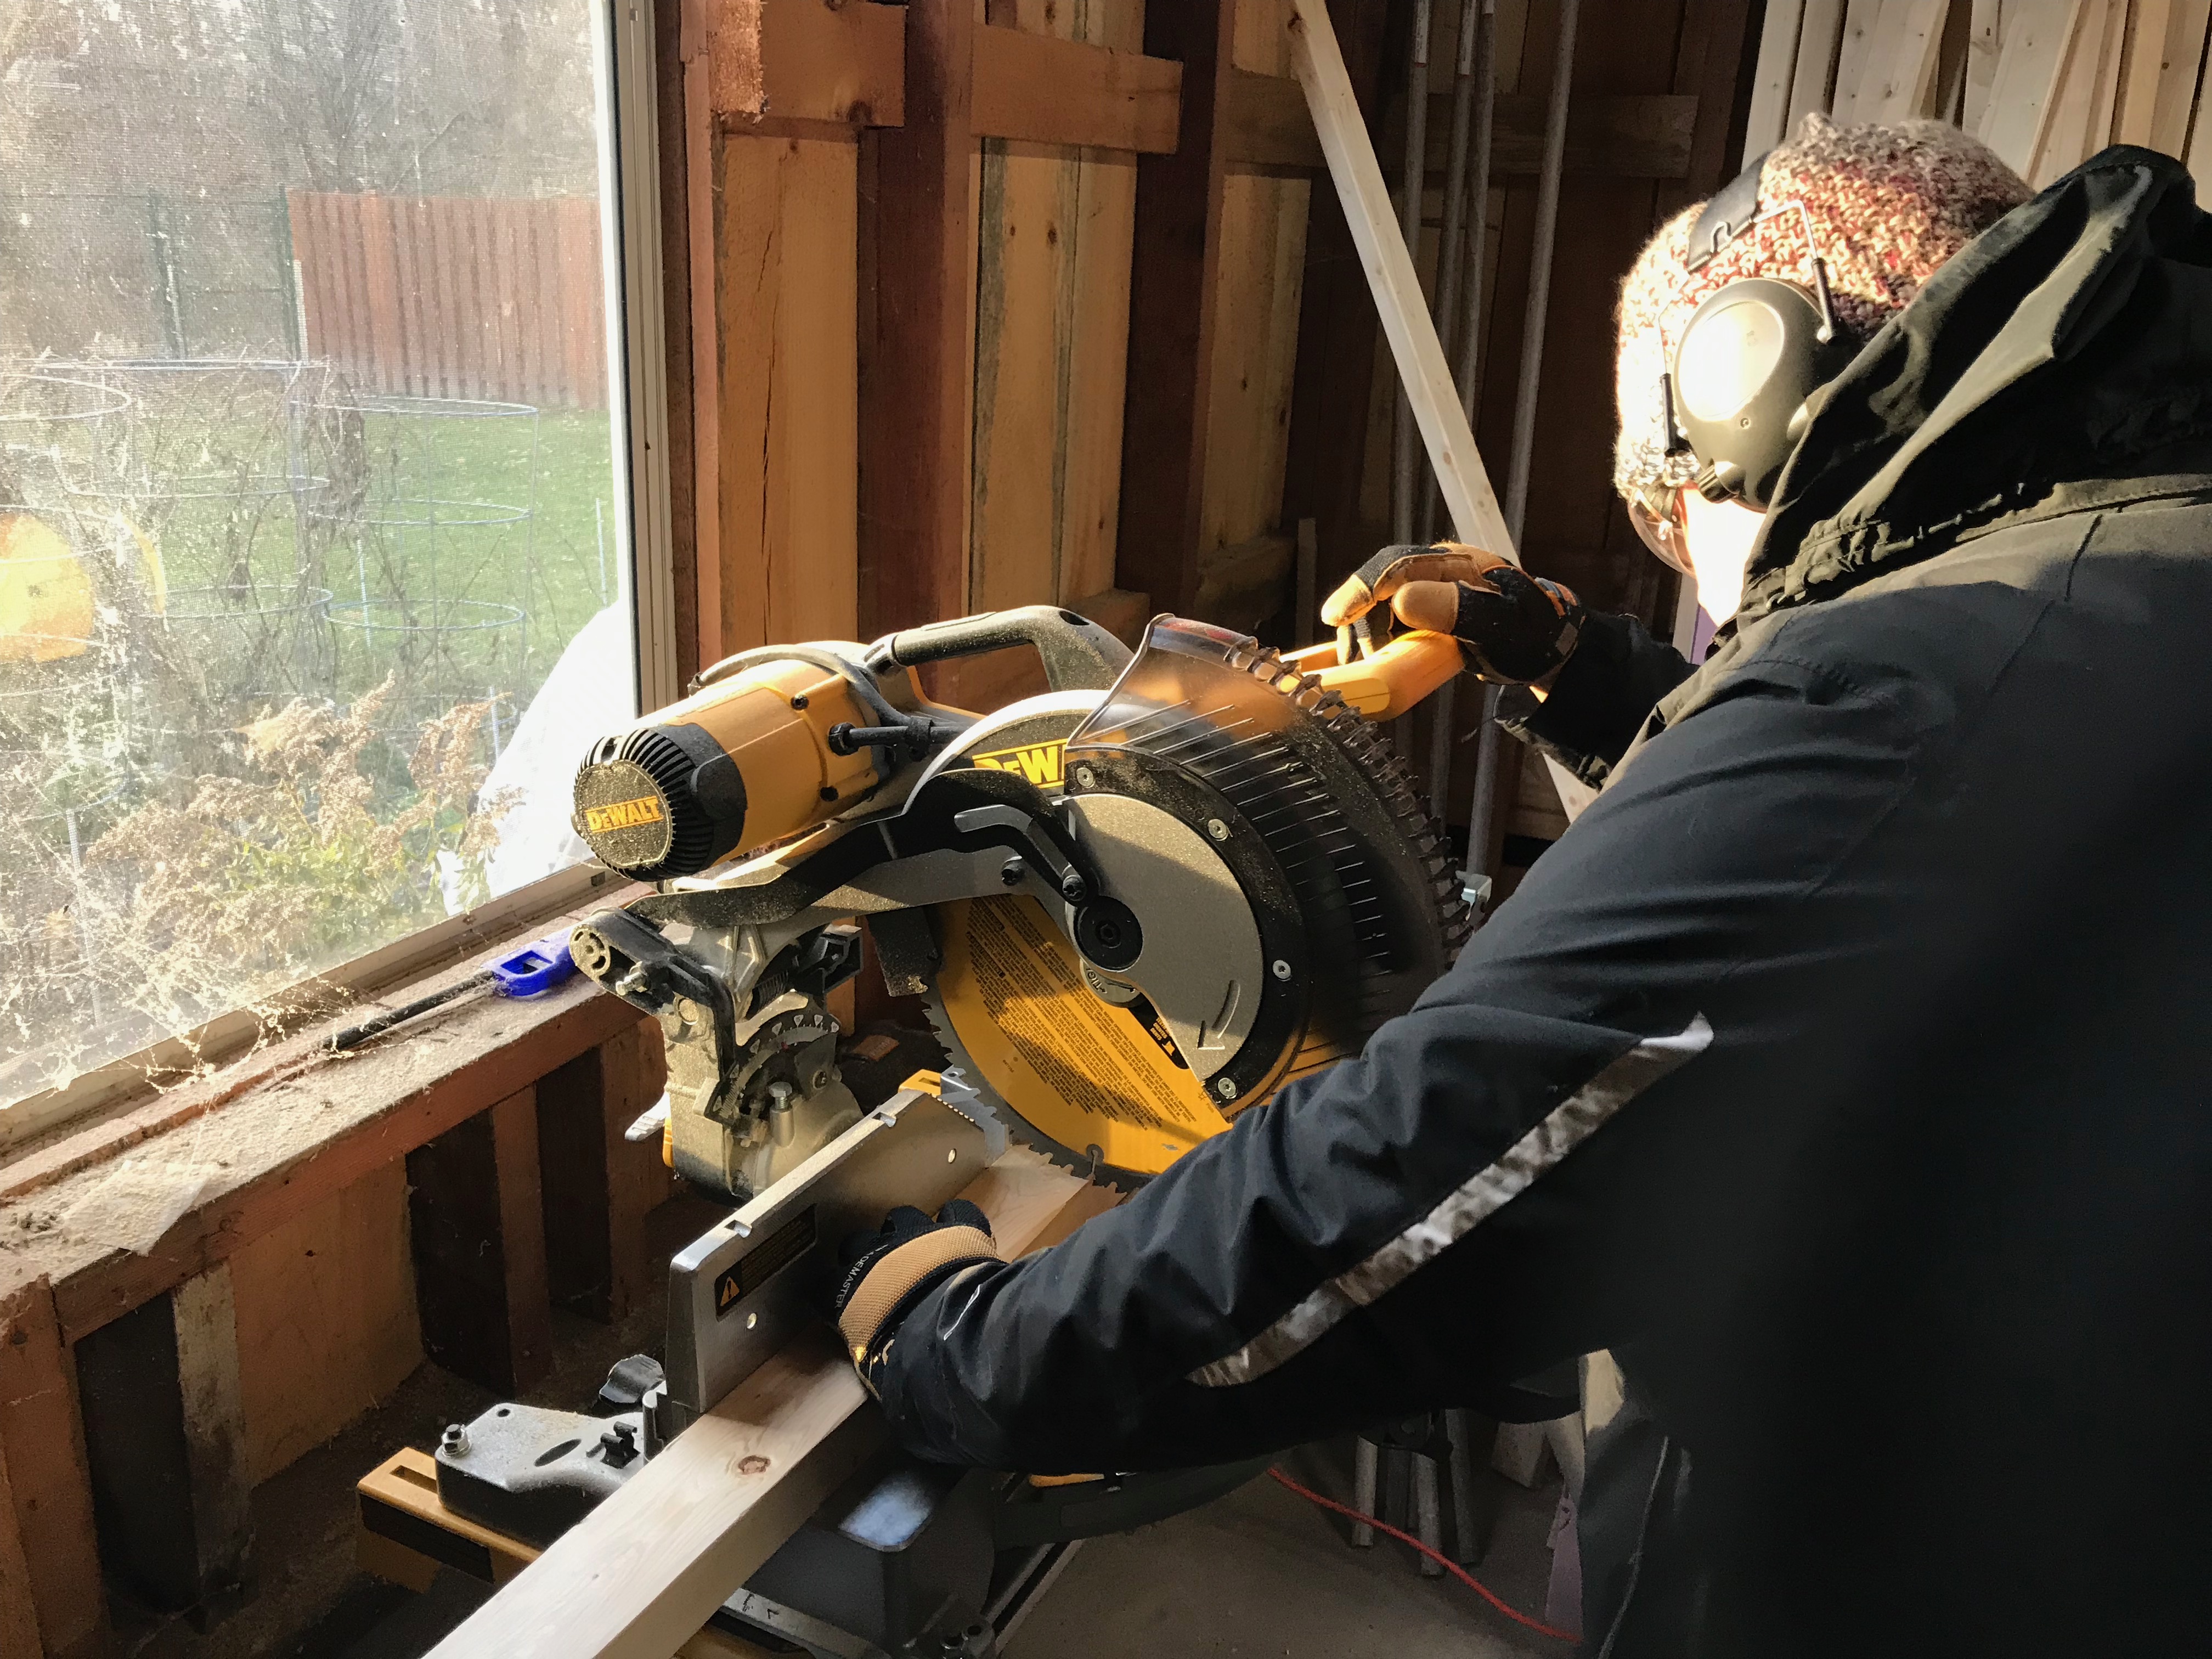 dachary uses miter saw